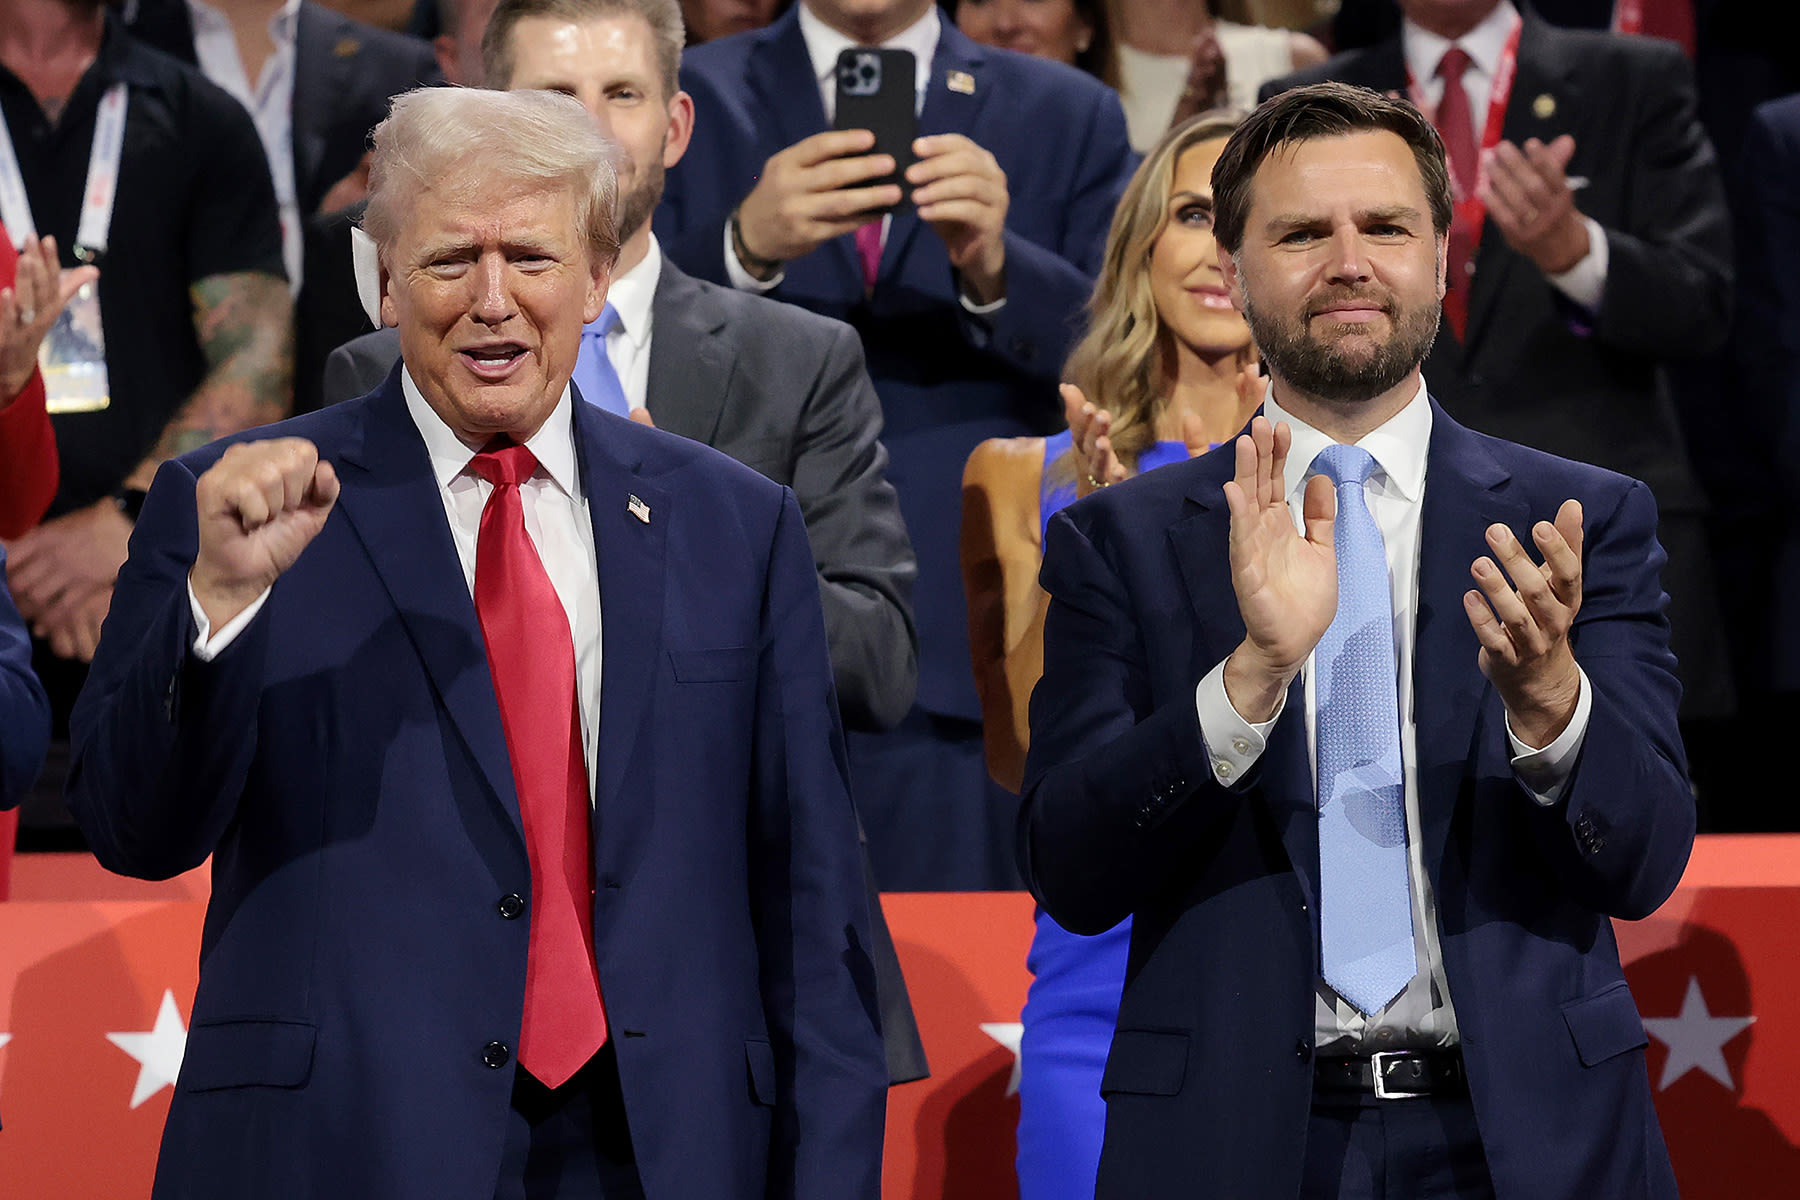 How to Watch Trump’s Speech at the 2024 Republican National Convention